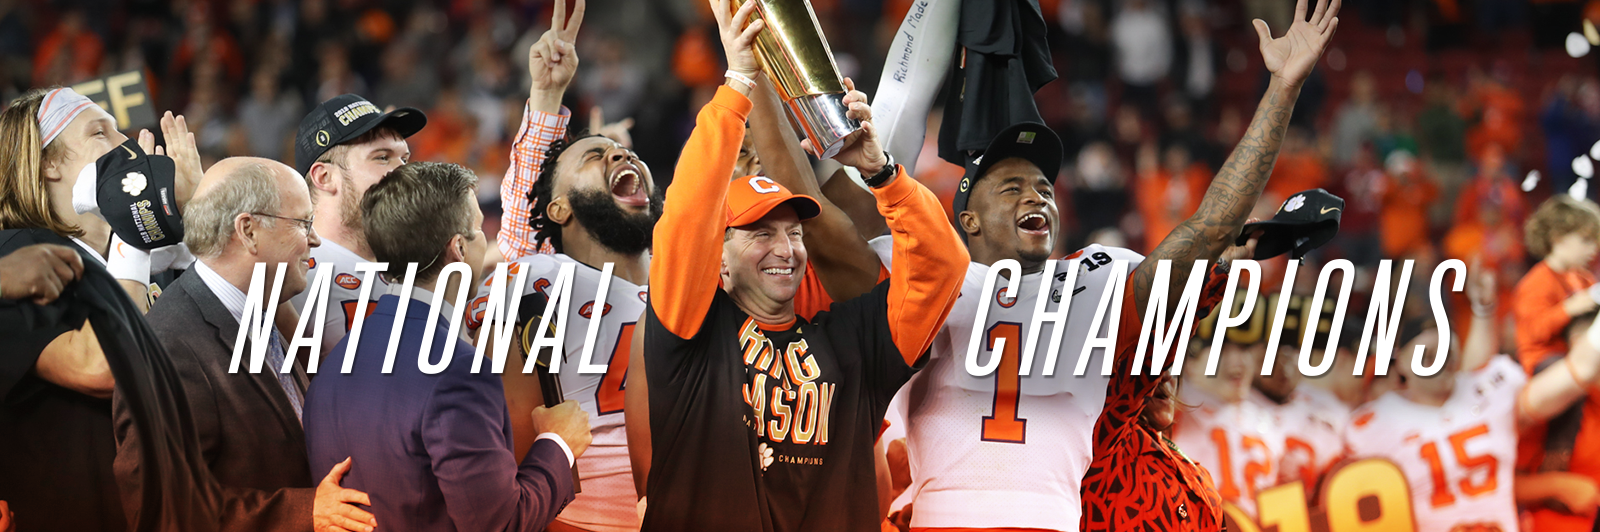 Coach Dabo Swinney and the football team hold up the National Championship trophy whil confetti falls around them.